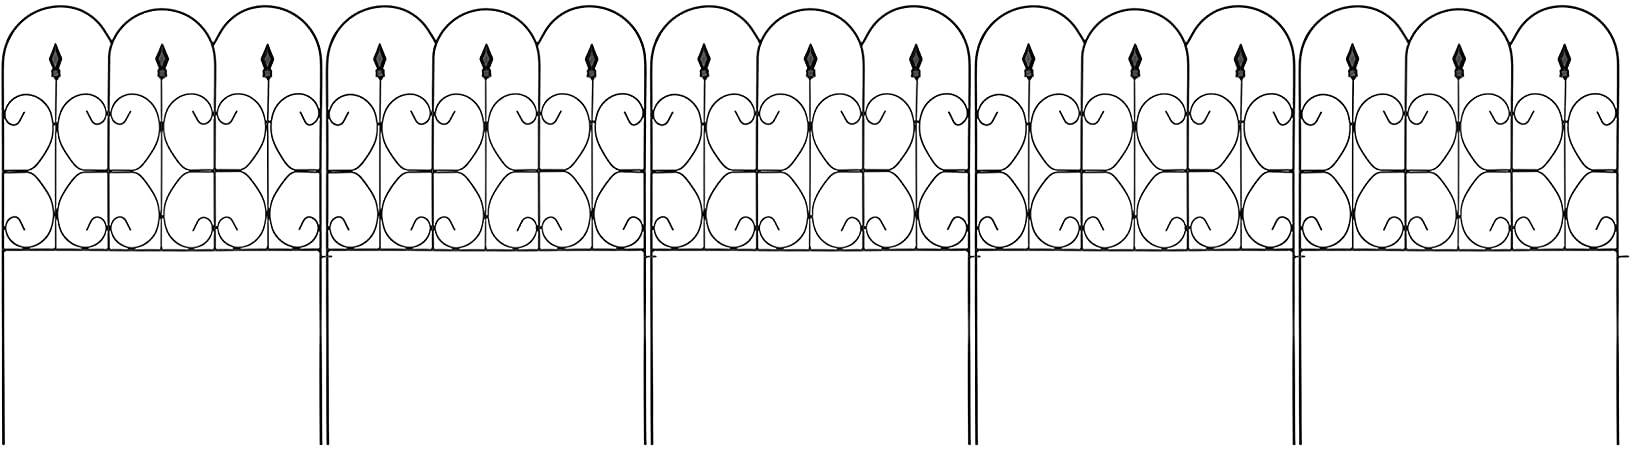 Best Choice Products 10ftx32in 5-Panel Foldable Interlocking Decorative Edging Fence Panels w/Rust-Free Powder Coat